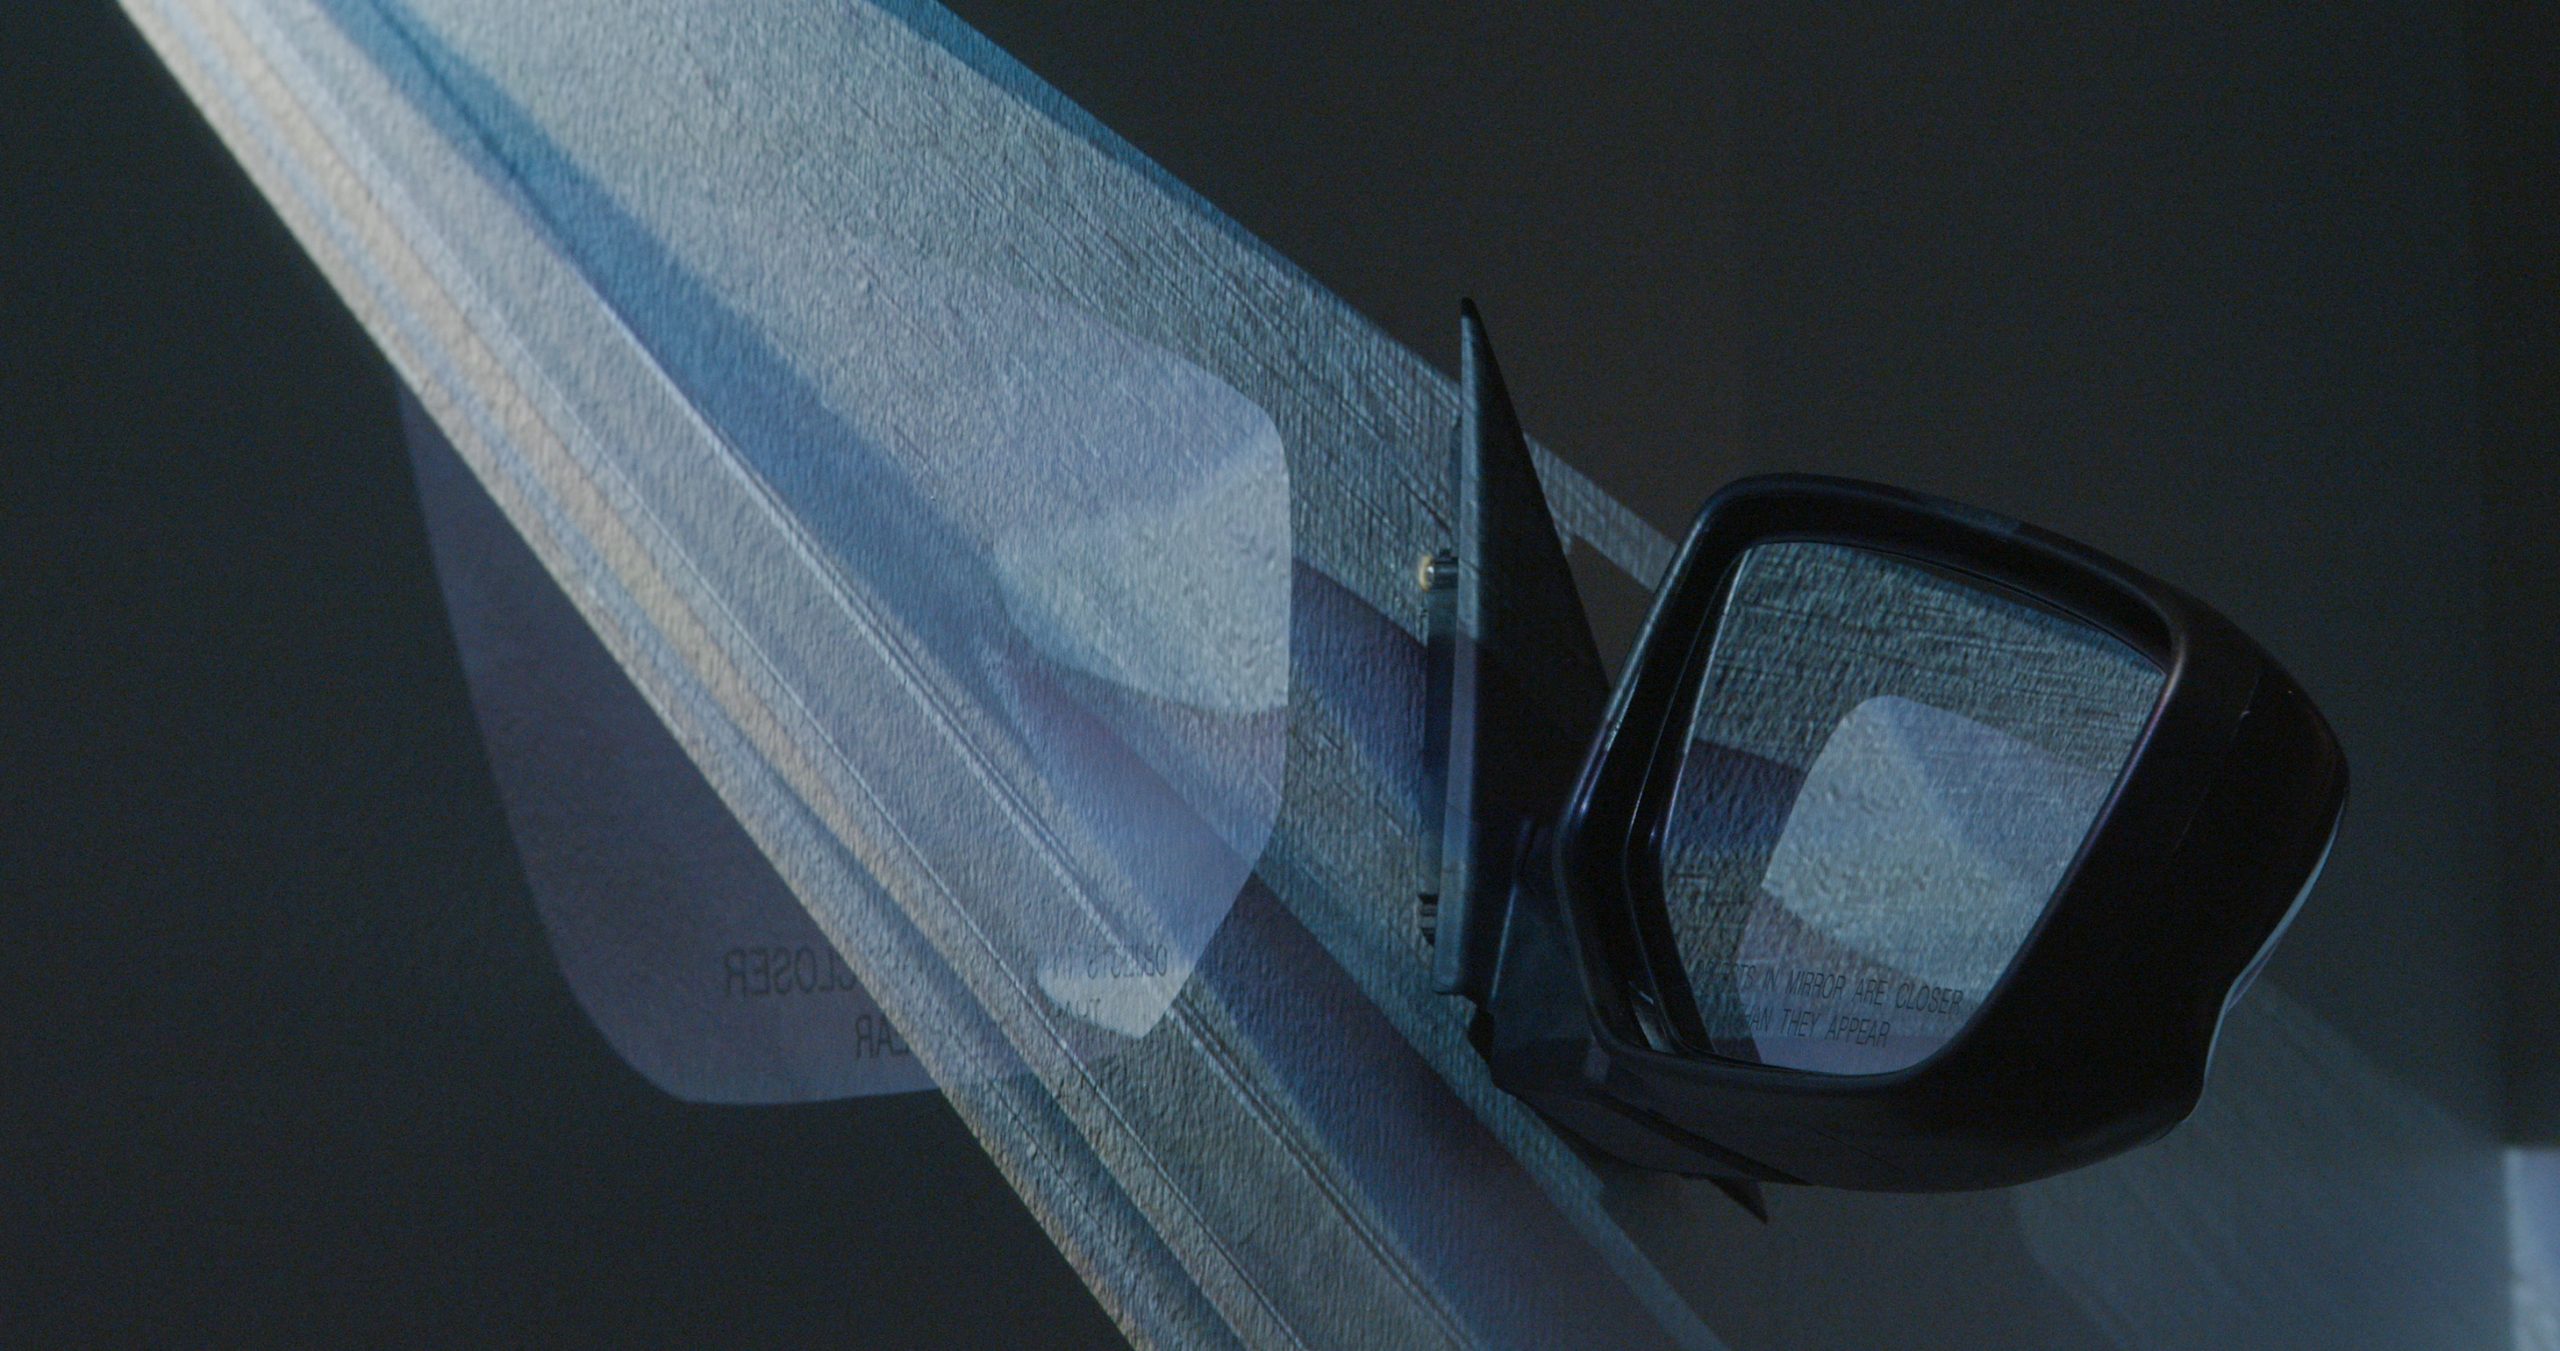 Image: Ruby Que, Objects in Mirror are Closer than They Appear, 2024. A car's passenger side mirror is mounted to the wall. A projected video of bluish light bisects the image on a diagonal, starting in the upper left corner and ending in the bottom right. A reflection of the image is faintly visible on the wall. Photo by Ruby Que.